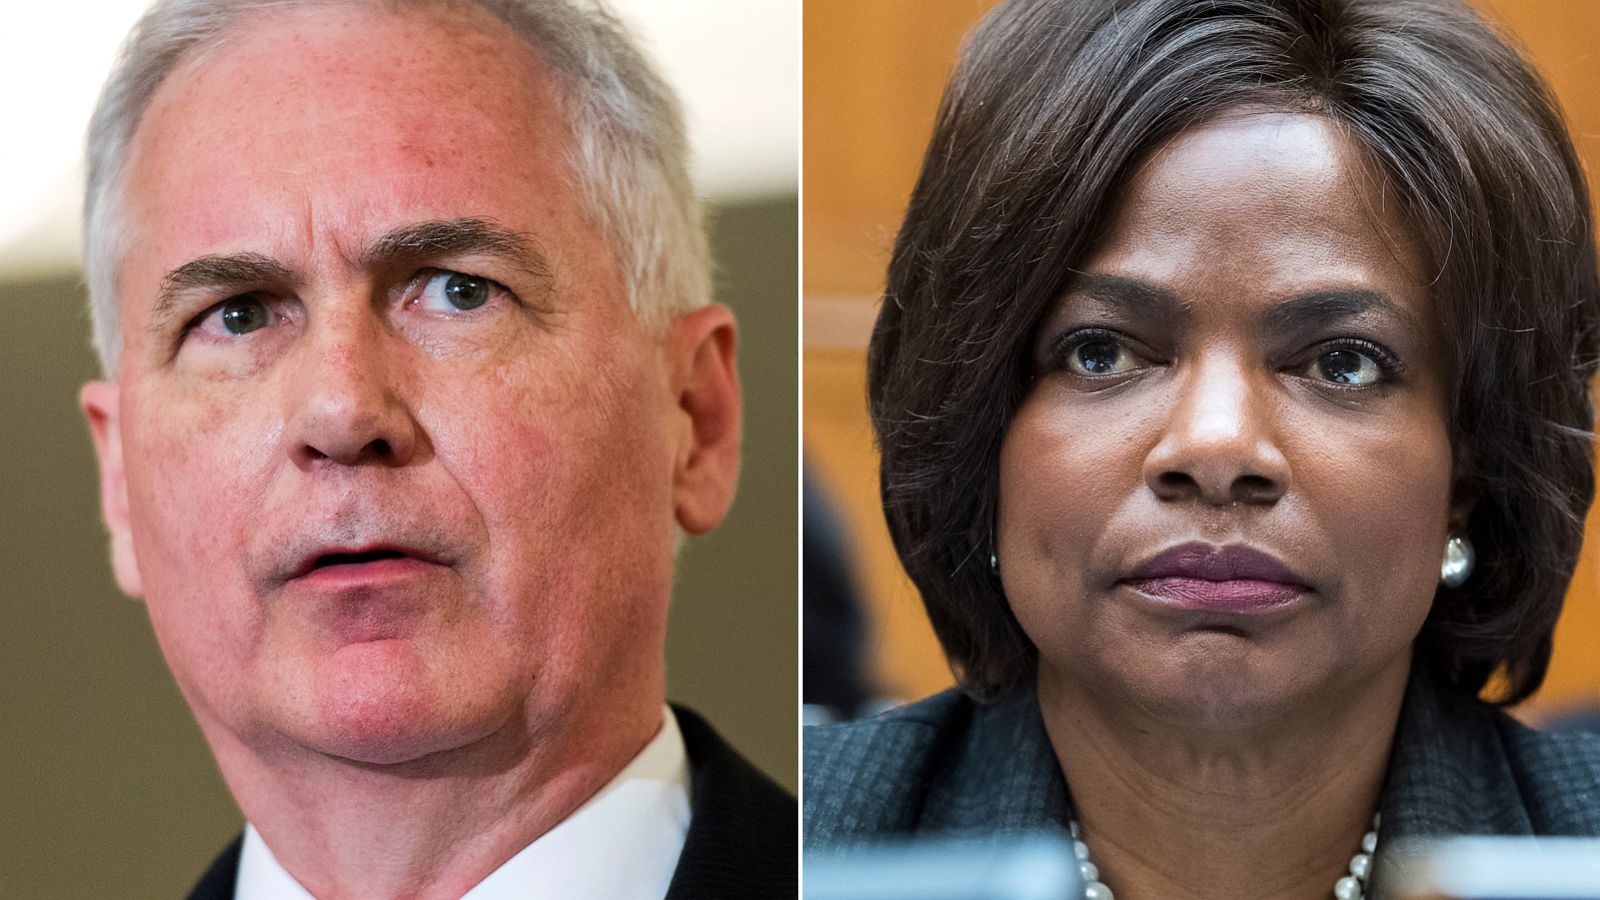 President, lawyers should participate in impeachment hearing Demings, McClintock pic